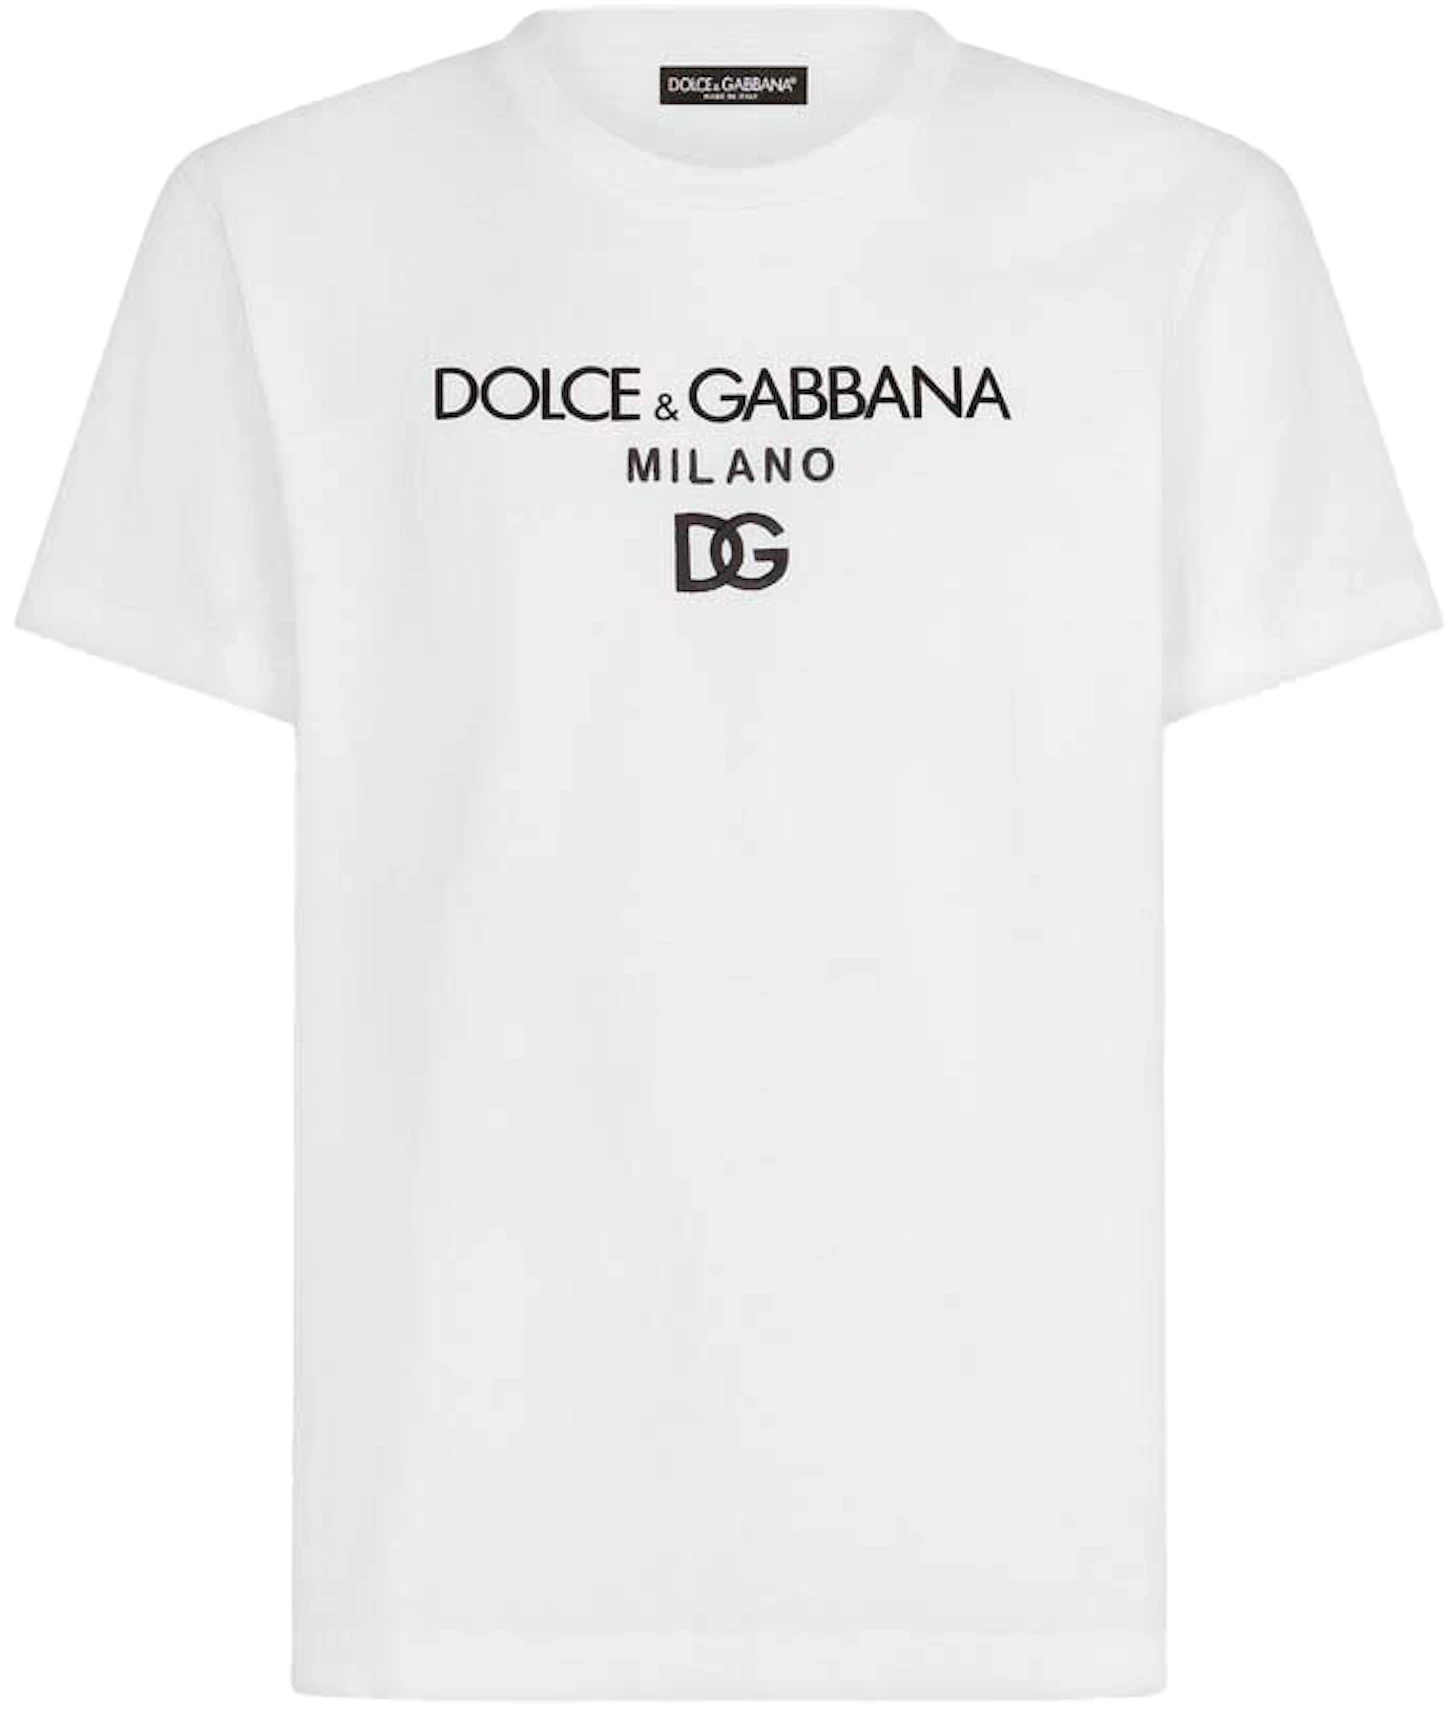 Dolce & Gabbana Cotton DG Embroidery and Patch T-shirt White - SS22 - US